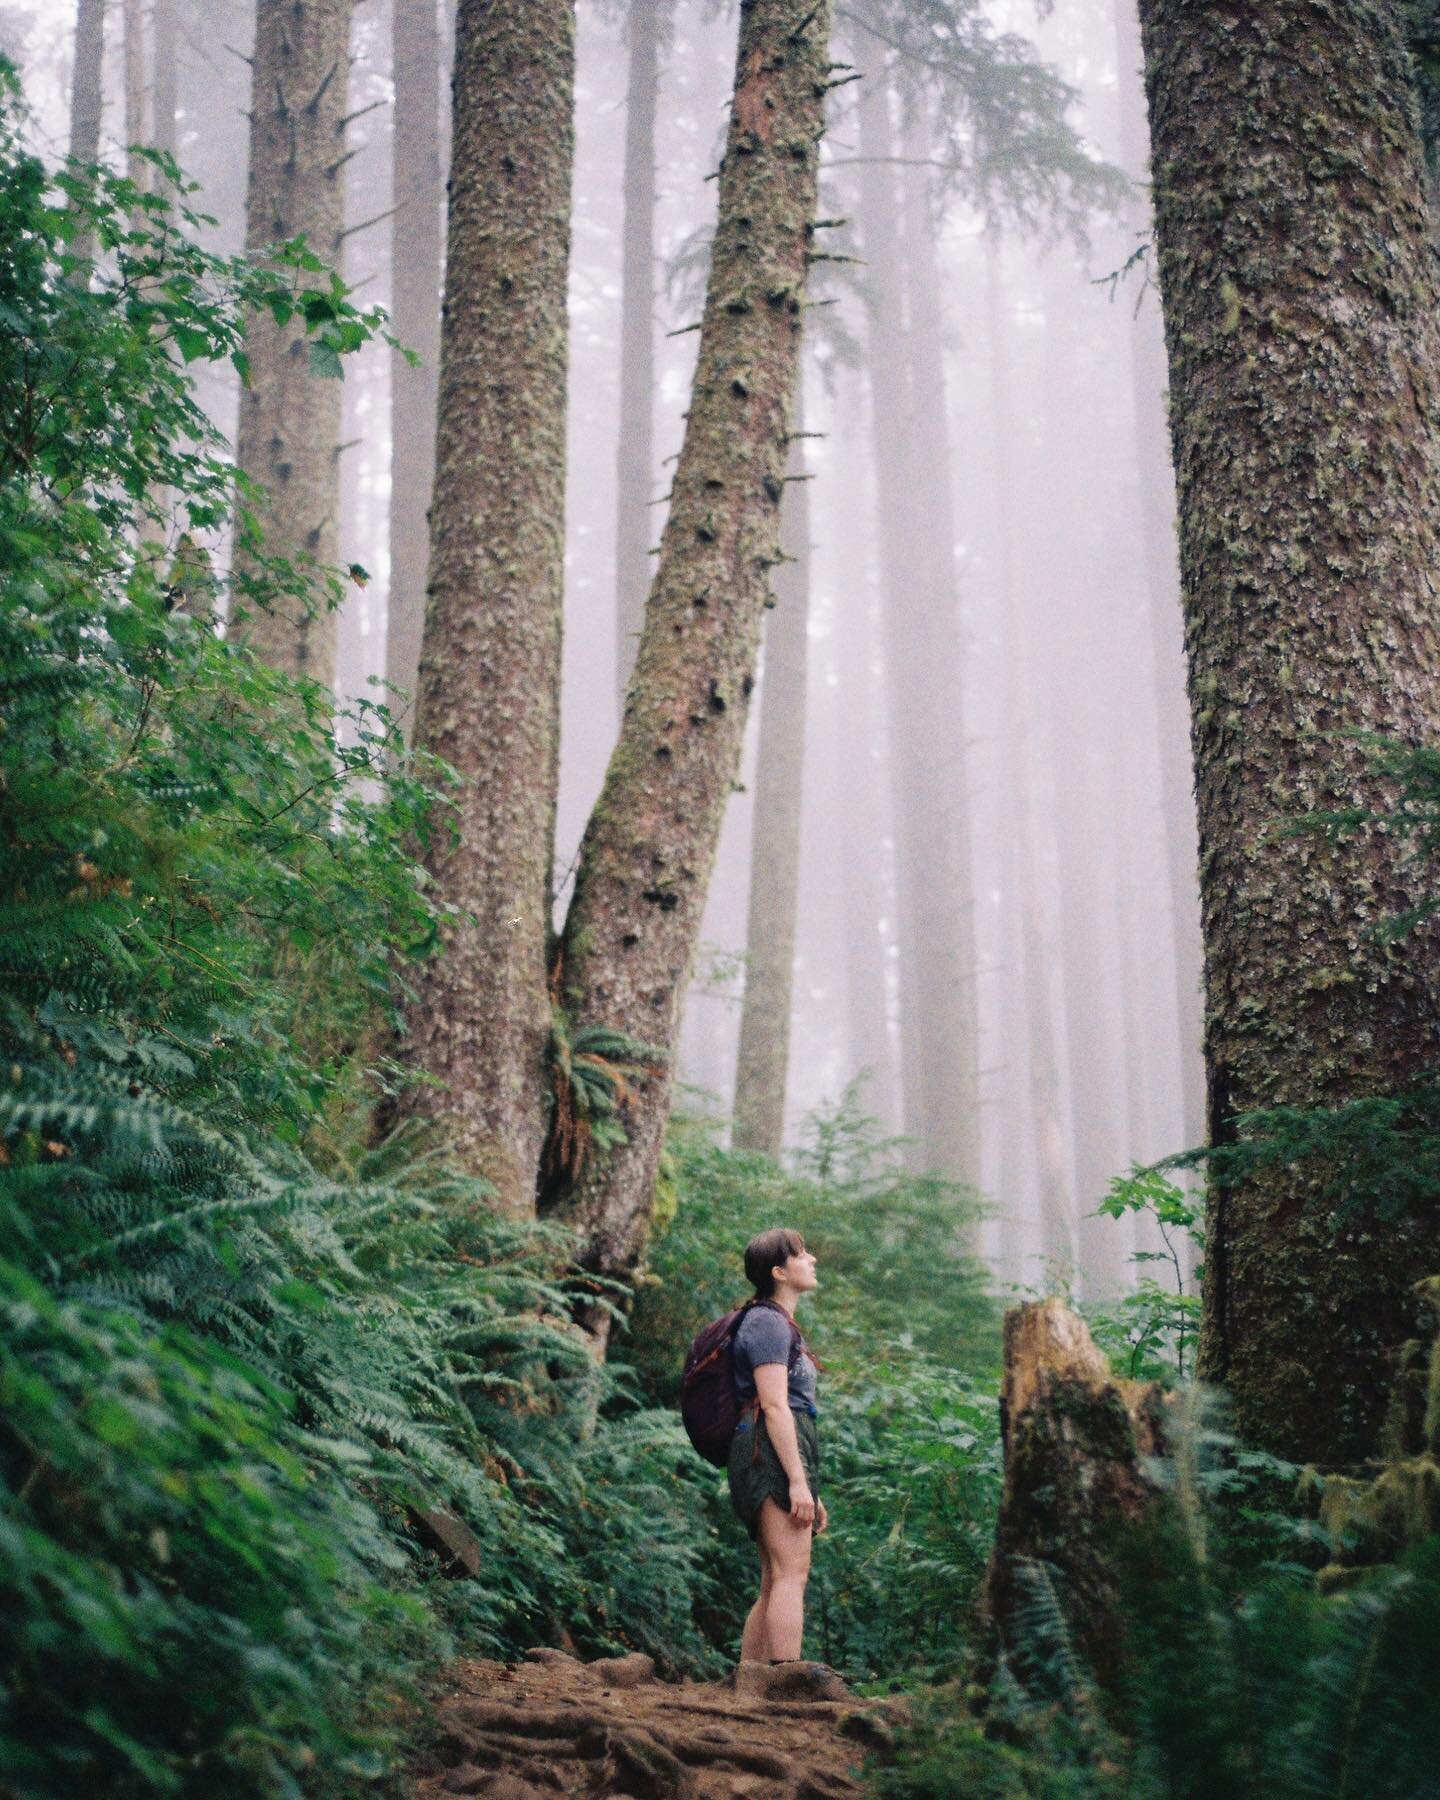 Trees have an uncanny way of inspiring awe #35mm #trees #oregon